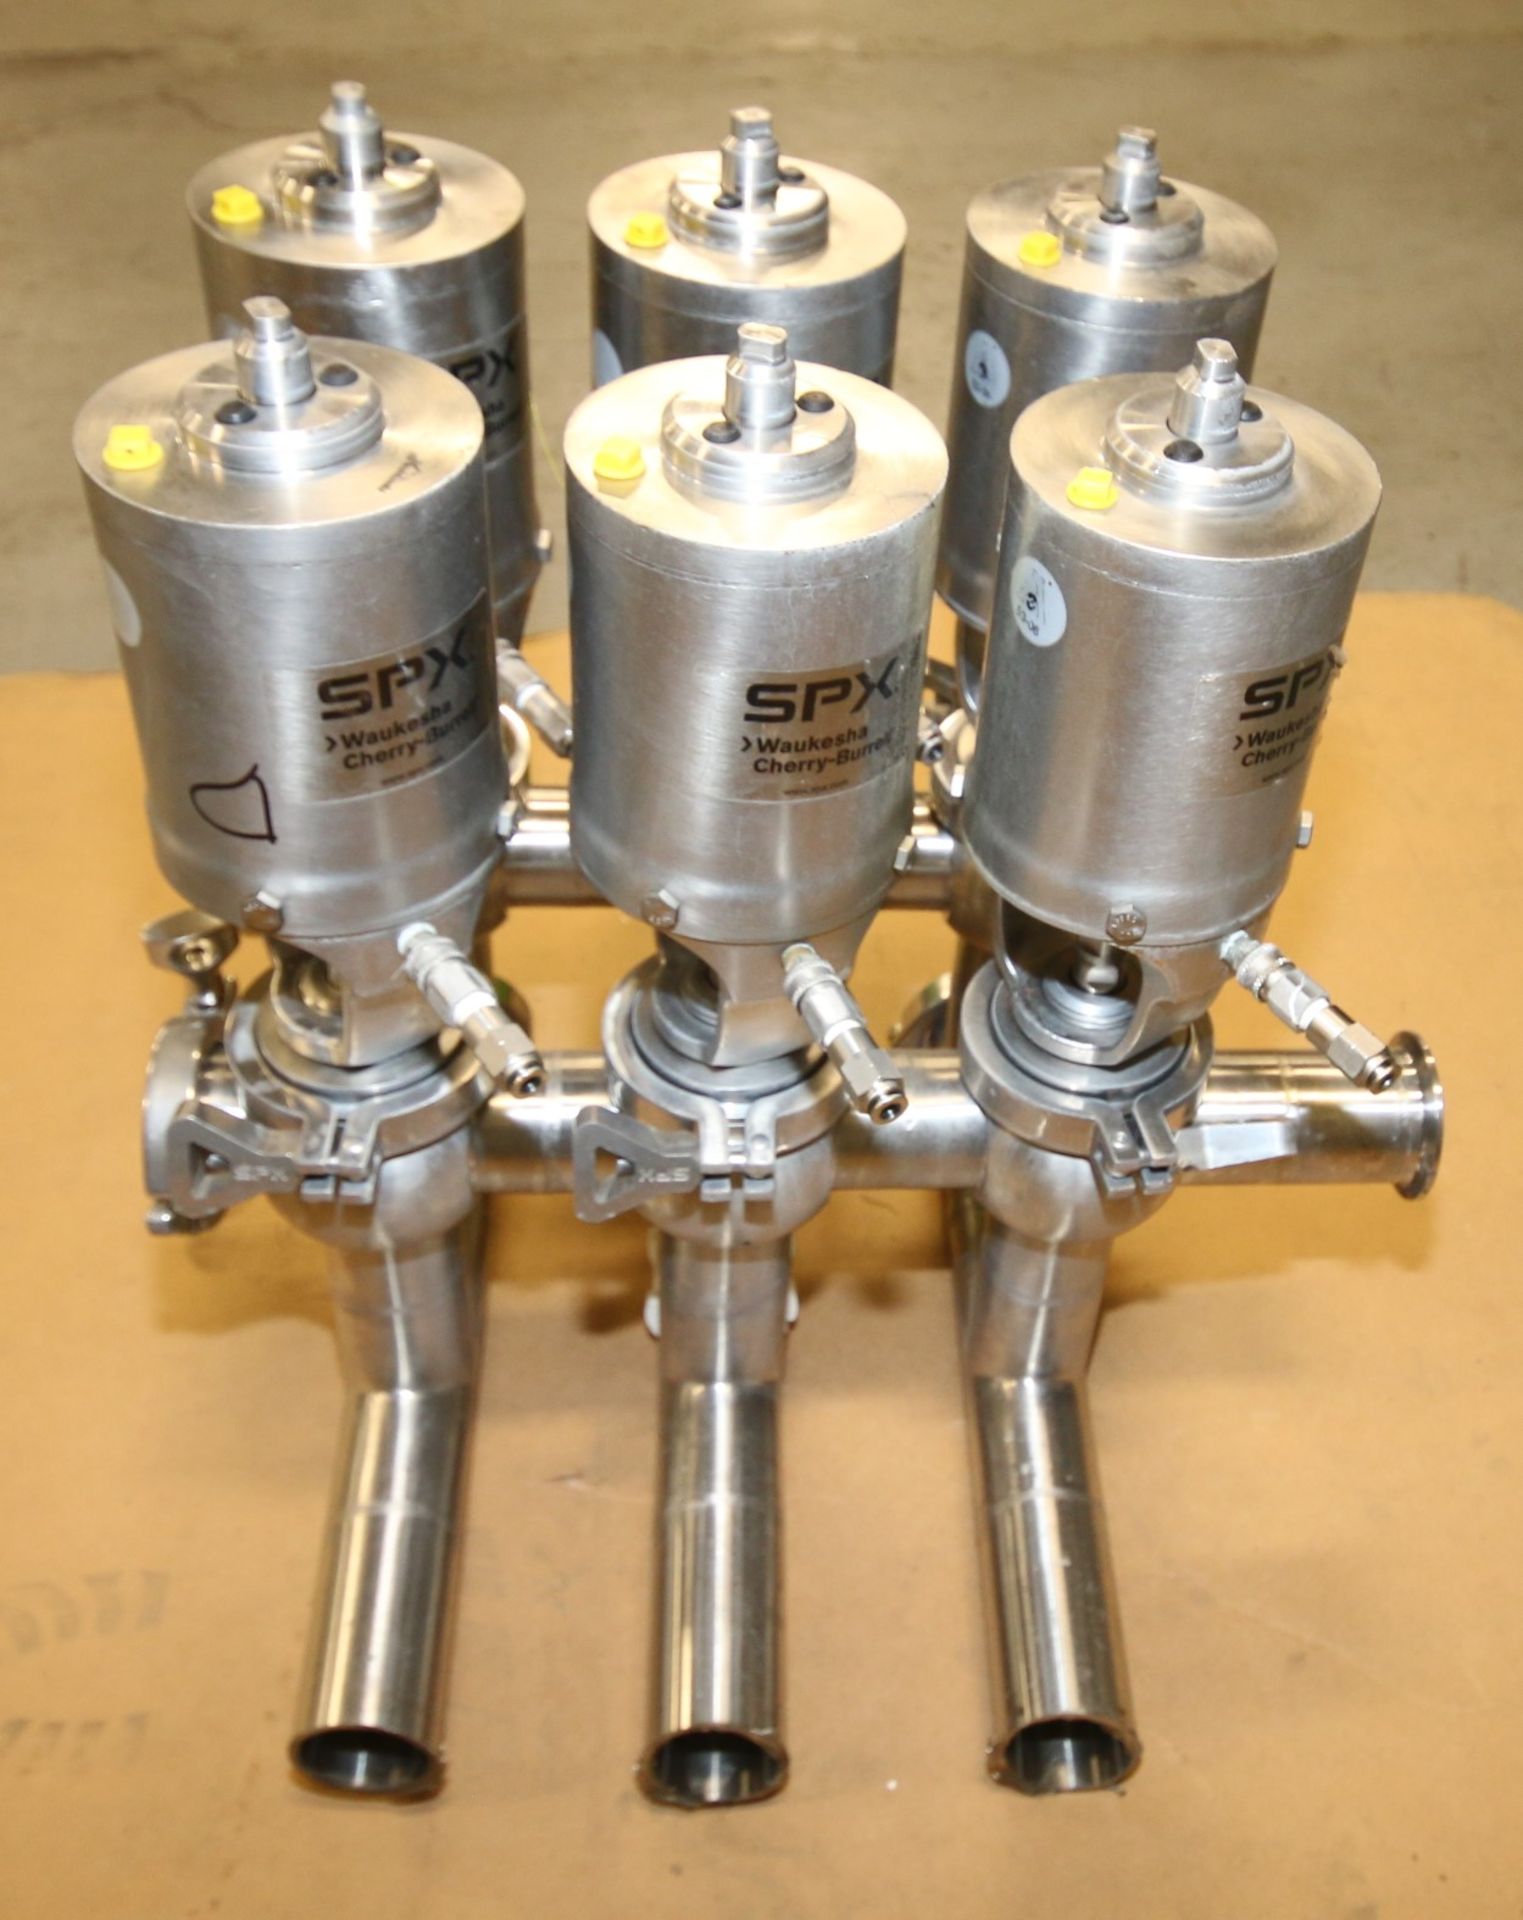 6-Valve WCB 2" S/S Air Valve Manifold / Cluster, with P/N W6101211 & 6100019 Valves - Image 3 of 4